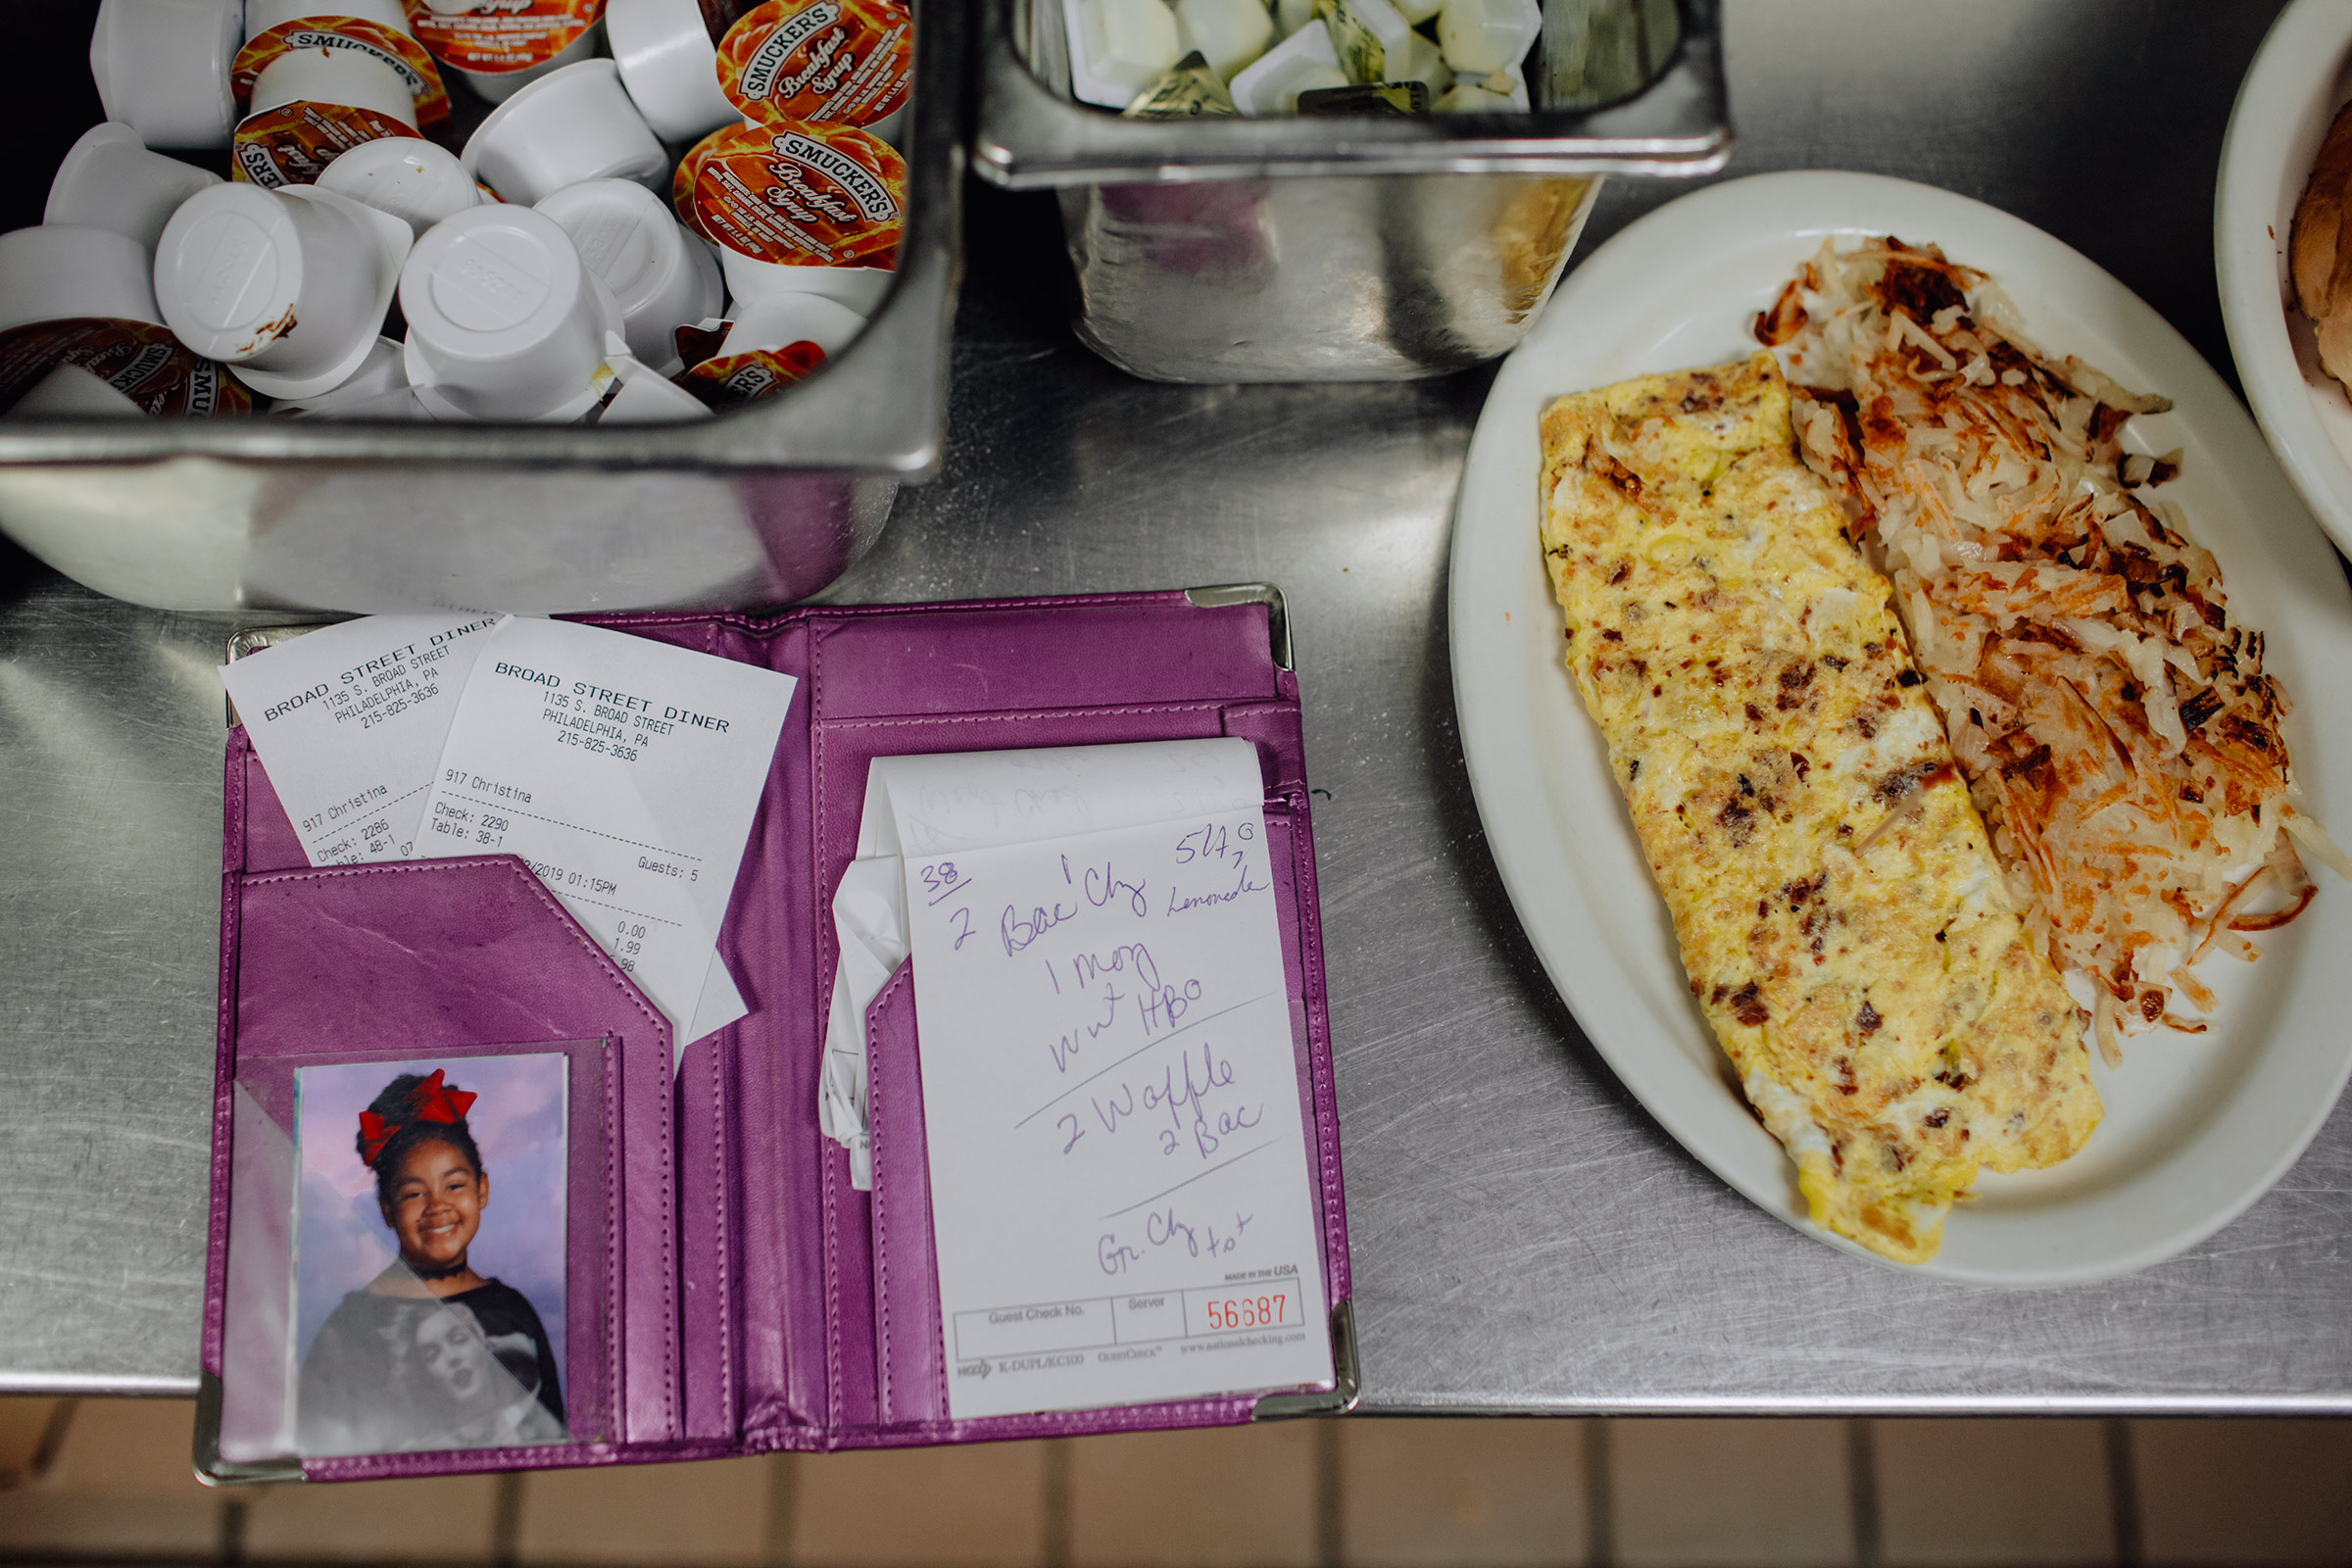 In the kitchen at the Broad Street Diner in Philadelphia, waitress Christina Munce keeps her daughter’s photo next to her pad for taking orders. Sept. 2 issue. (Sasha Arutyunova for TIME)